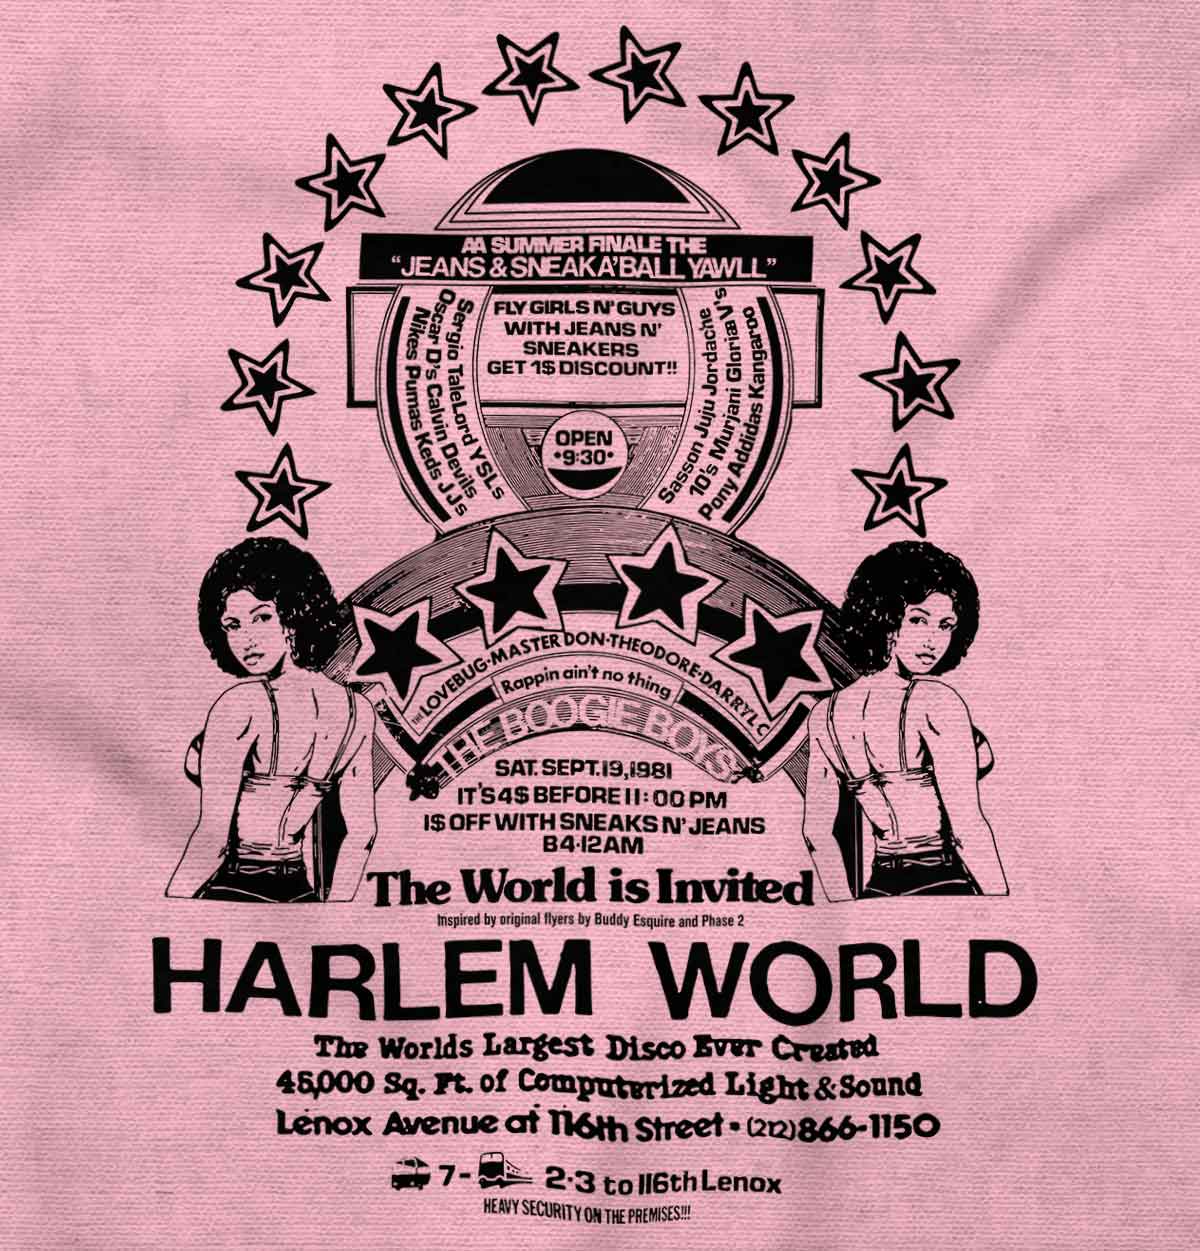 A black-and-white graphic showing the influence of rap's golden era in Harlem, the birthplace of hip-hop.